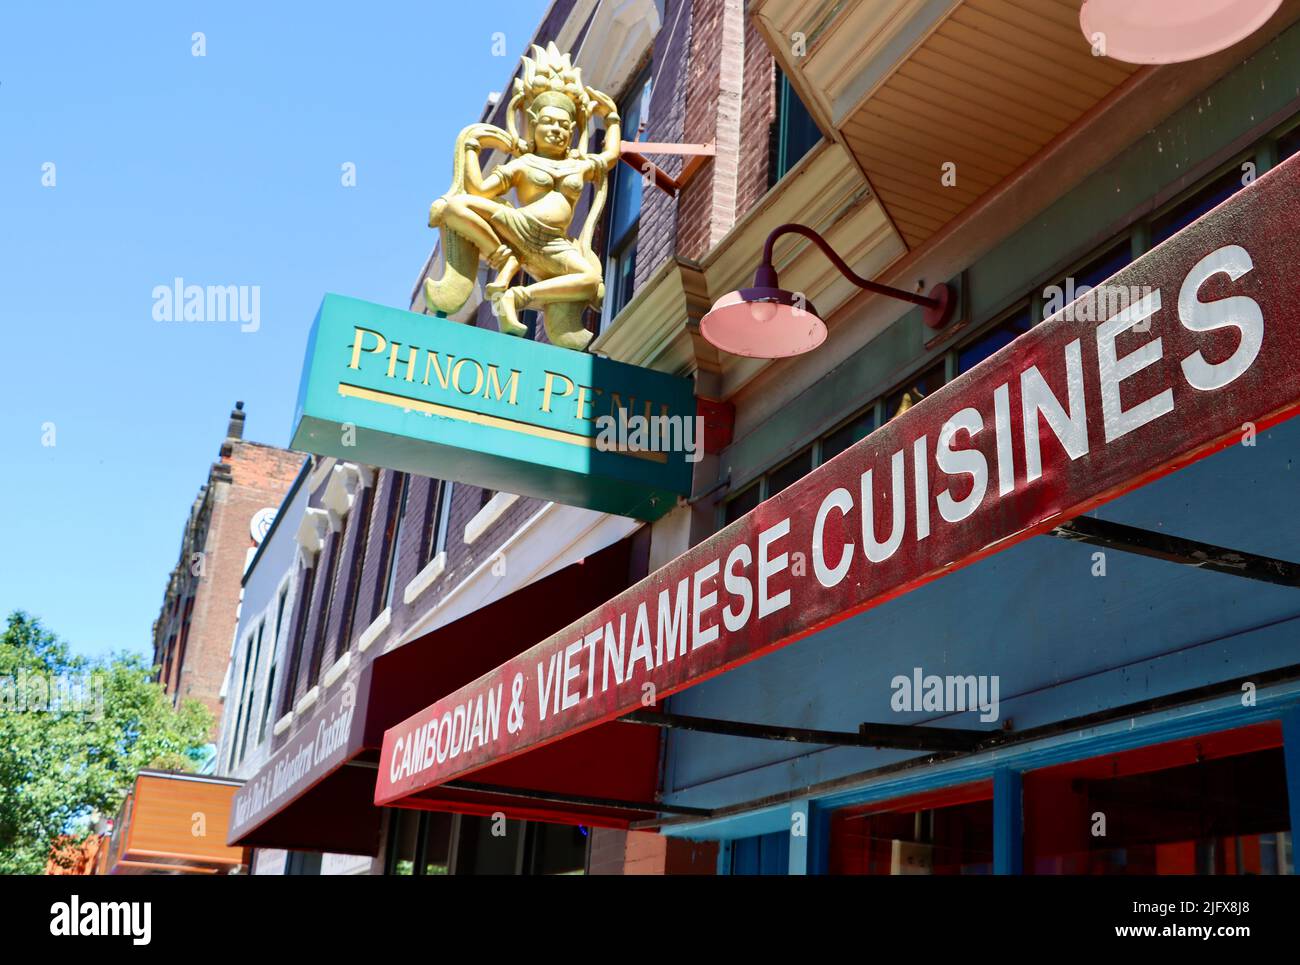 Cambodian and Vietnamese restaurant in Cleveland, Ohio in May 2022 Stock Photo